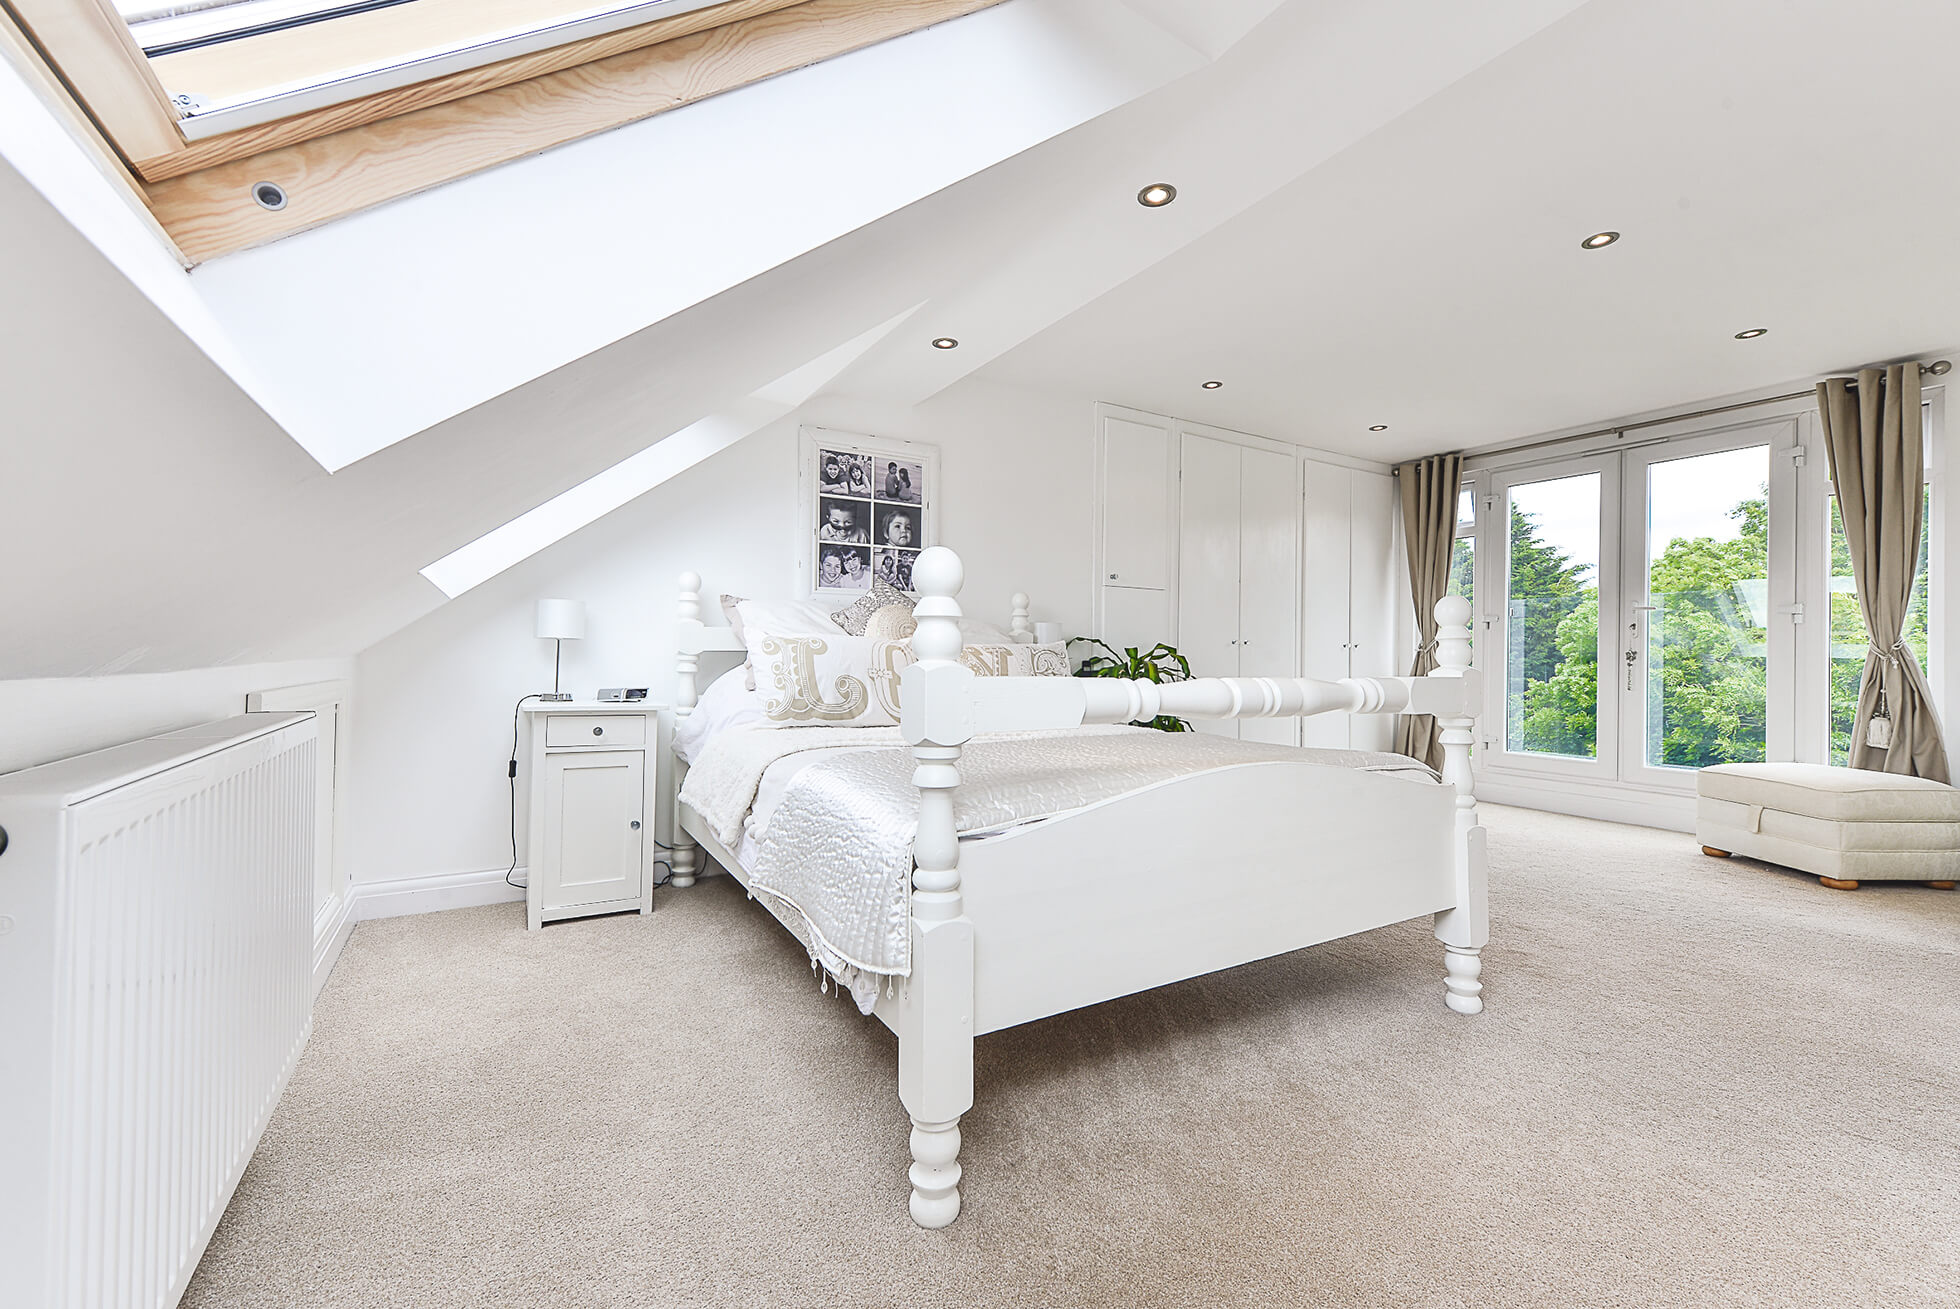 Do you have a question about converting your Loft in Flaunden? Here are the most popular questions asked by our clients.